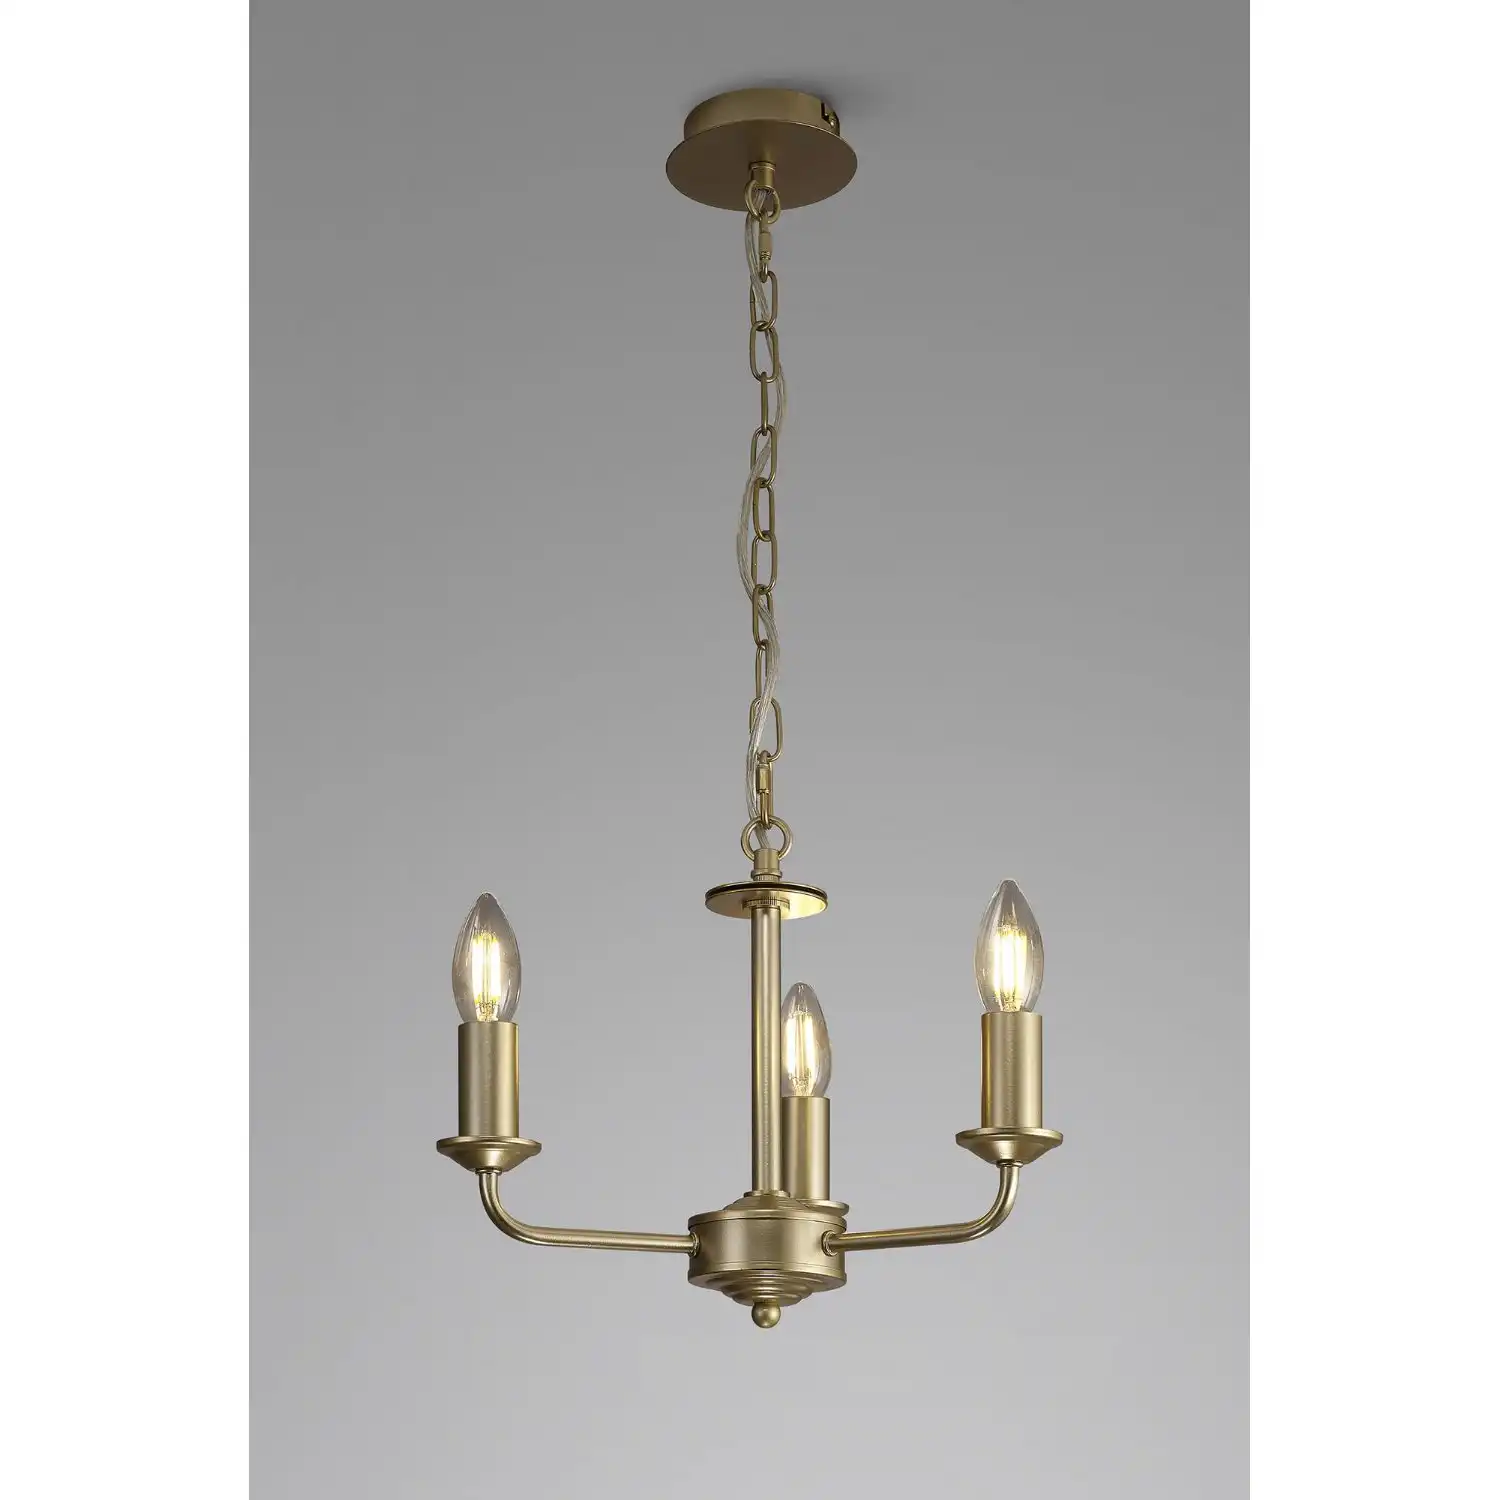 Banyan 3 Light Multi Arm Pendant Without Shade, c w 1.5m Chain, E14 Painted Champagne Gold